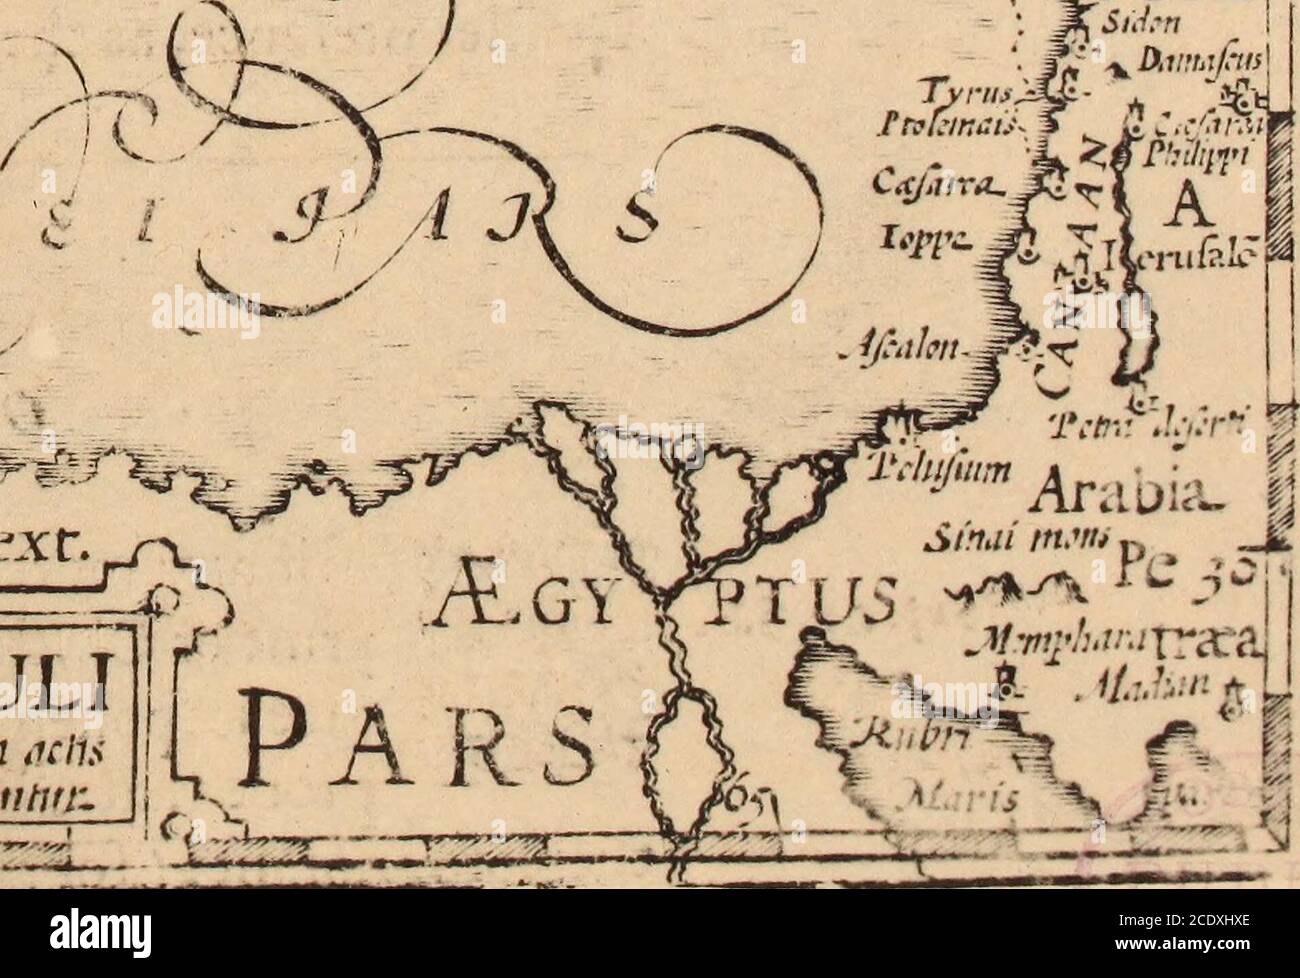 . Hakluytus posthumus, or, Purchas his Pilgrimes: contayning a history of the world in sea voyages and lande travells by Englishmen and others . c&gt;y!yjf/rri^nhmhn^ • -,^,... *^r*Pher%^ HONDIUS HIS MAP OF SAINT PAULS PEREGRINATIONS THE PEOPLING OF AMERICA The remotest Northerne and Southerne parts of * As CanaanAmerica are yet thinly inhabited,* and in great part not was mAbra-at all, as before is observed, whereas Mexicana, and not^ns; s0Peruviana were abundantly peopled at the Spaniards populous as infirst arrivall, with the Hands adjacent. Two great Em- Joshuas.pires were there erected, o Stock Photo